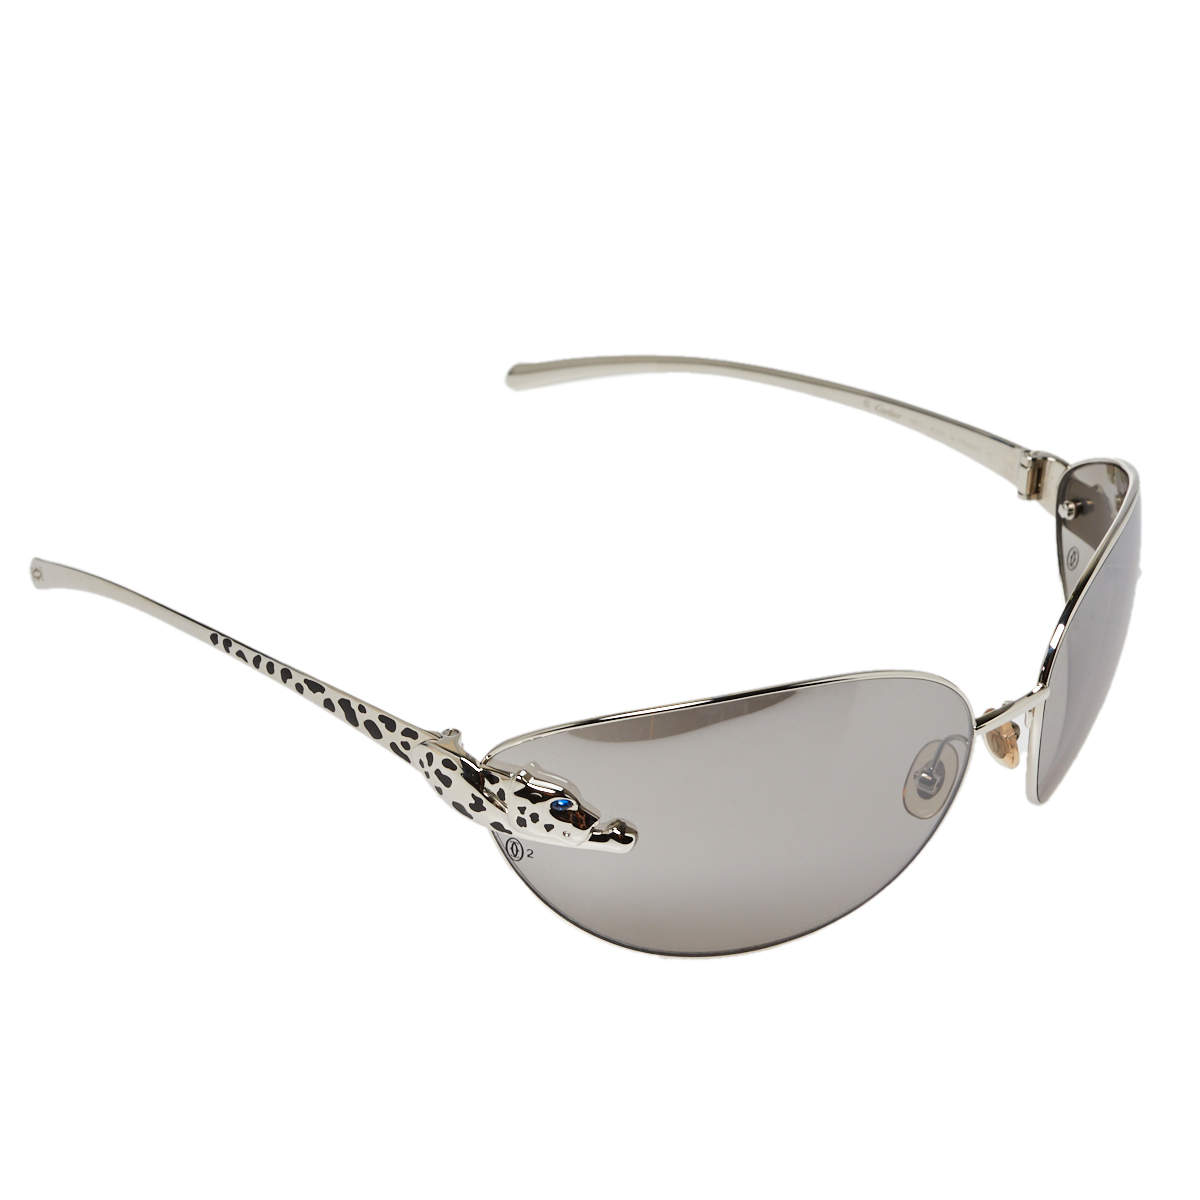 Cartier Silver Tone/Grey Gradient Limited Edition Panthere de Aviator Sunglasses